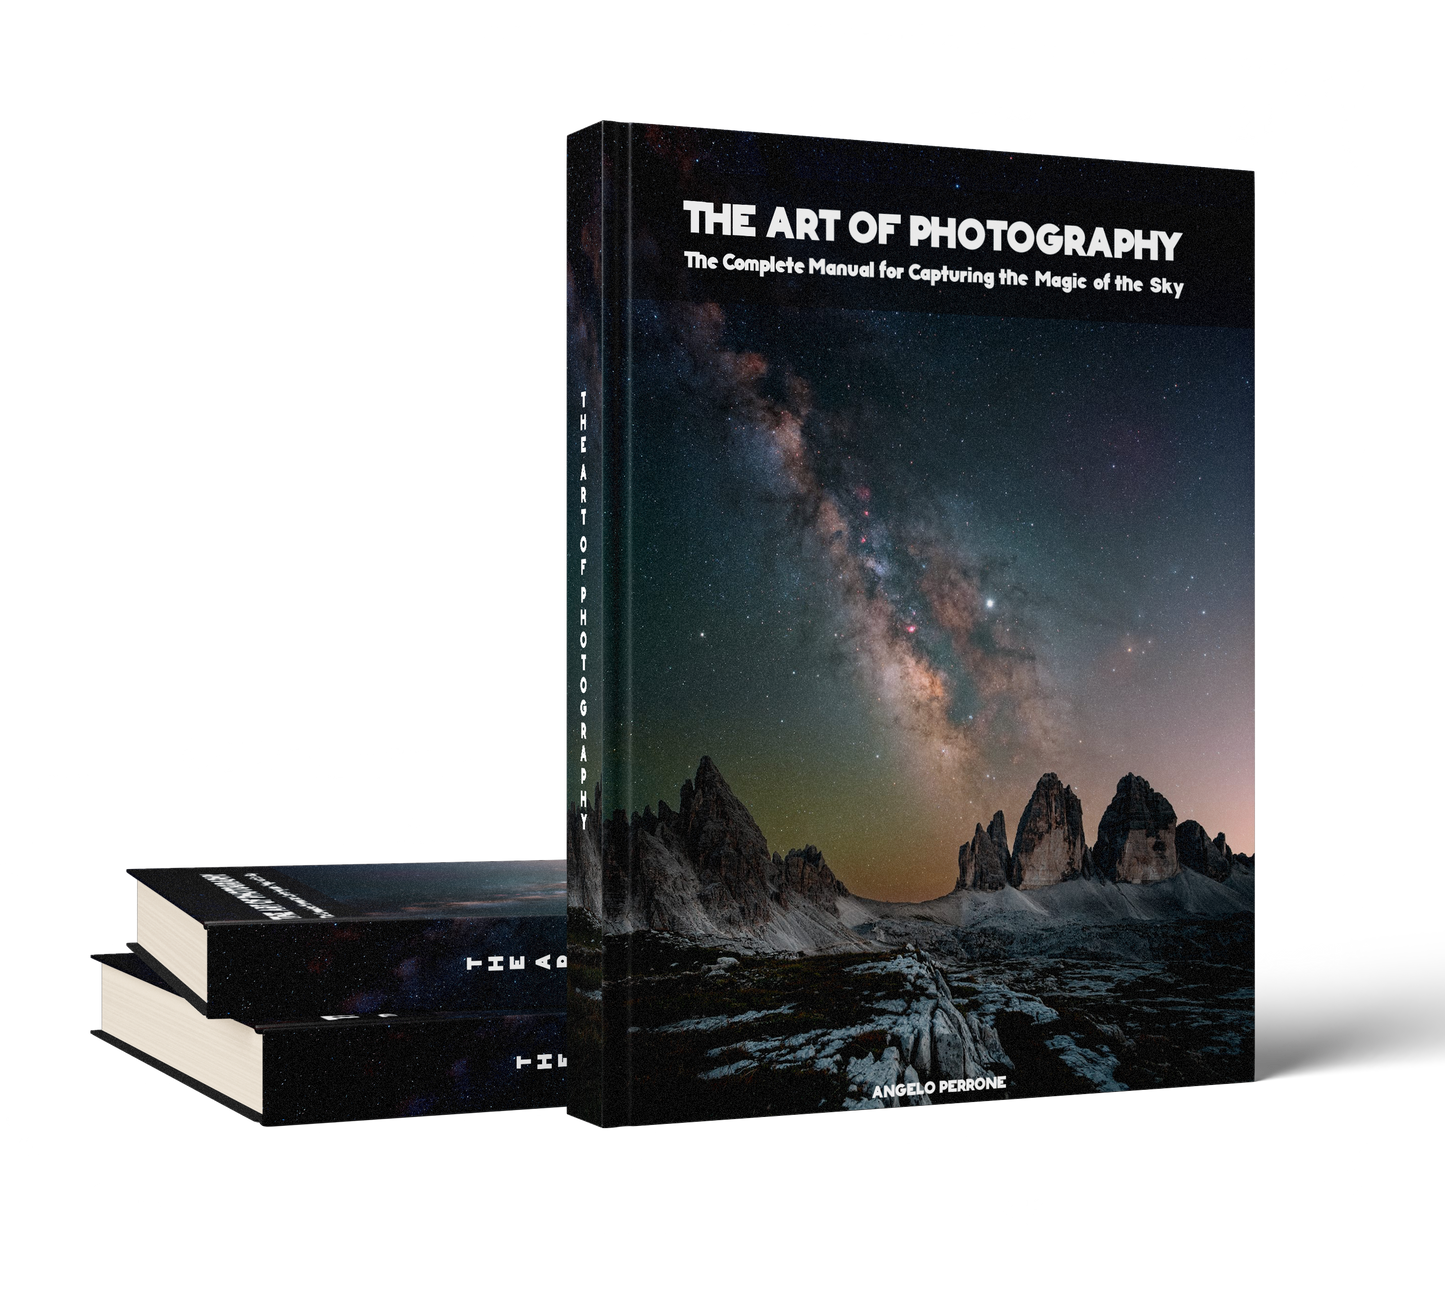 The Art of Photography: The Complete Manual for Capturing the Magic of the Sky